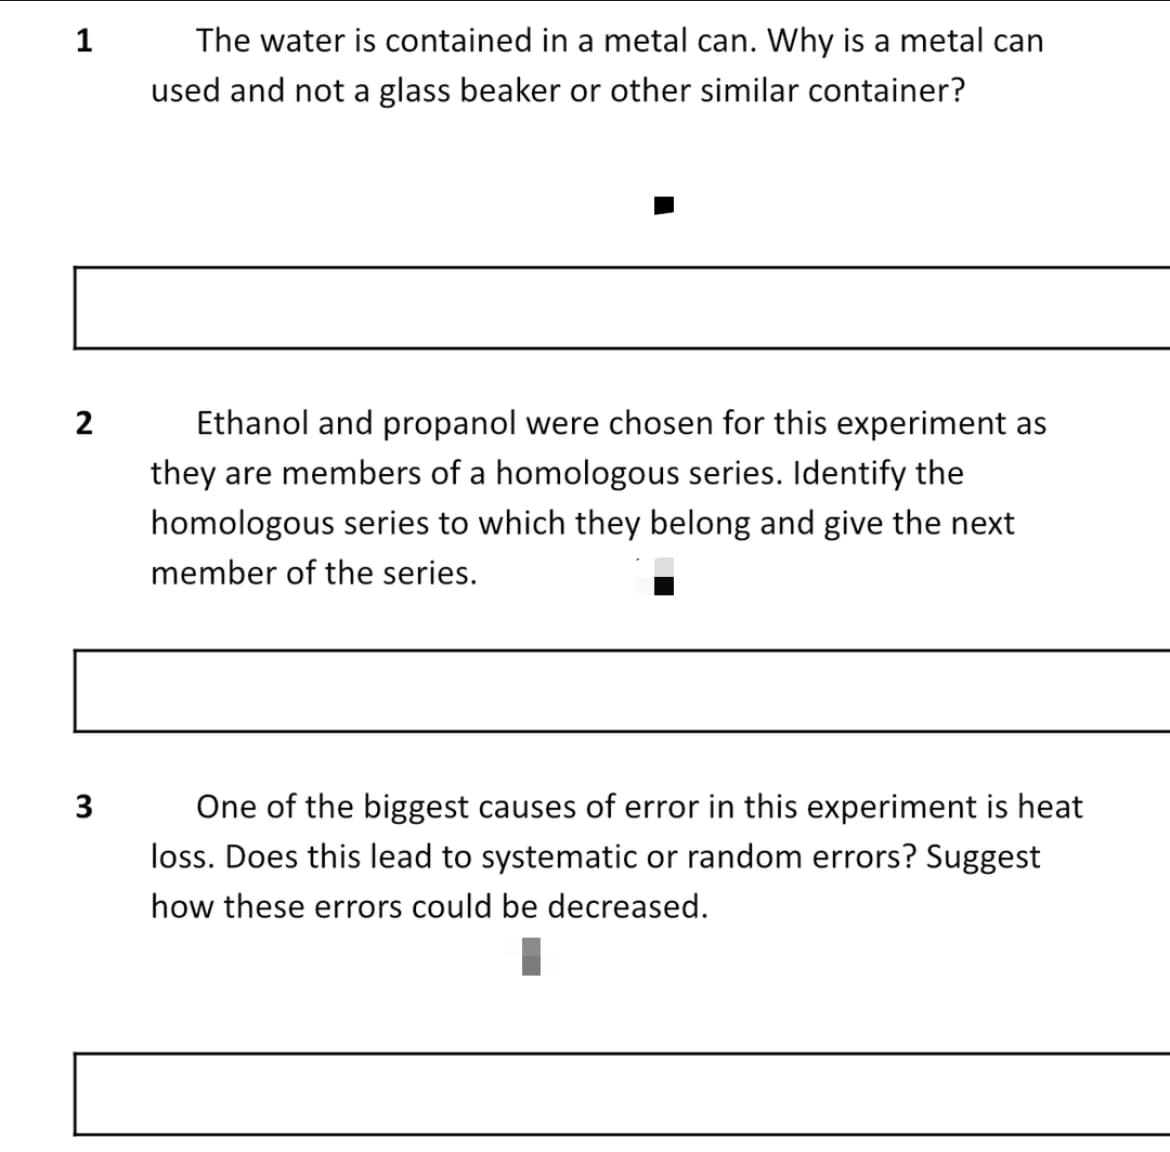 1
The water is contained in a metal can. Why is a metal can
used and not a glass beaker or other similar container?
Ethanol and propanol were chosen for this experiment as
they are members of a homologous series. Identify the
homologous series to which they belong and give the next
member of the series.
3
One of the biggest causes of error in this experiment is heat
loss. Does this lead to systematic or random errors? Suggest
how these errors could be decreased.
